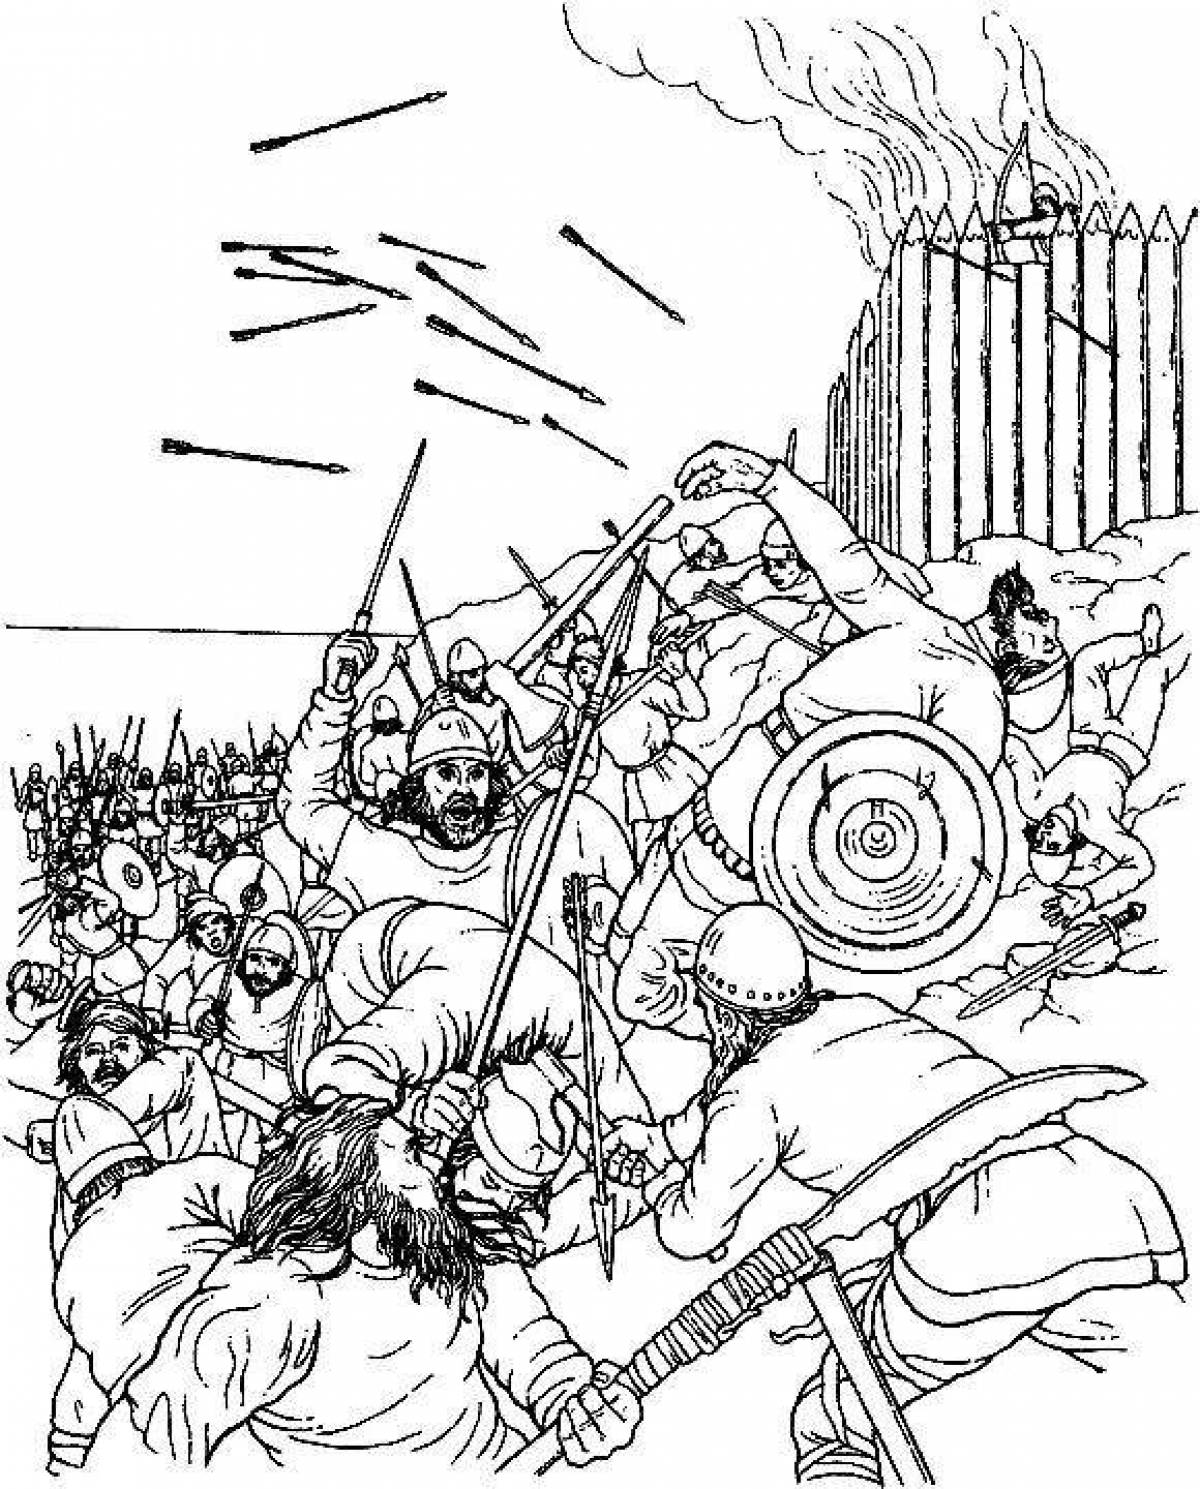 Viking unstoppable battle coloring page